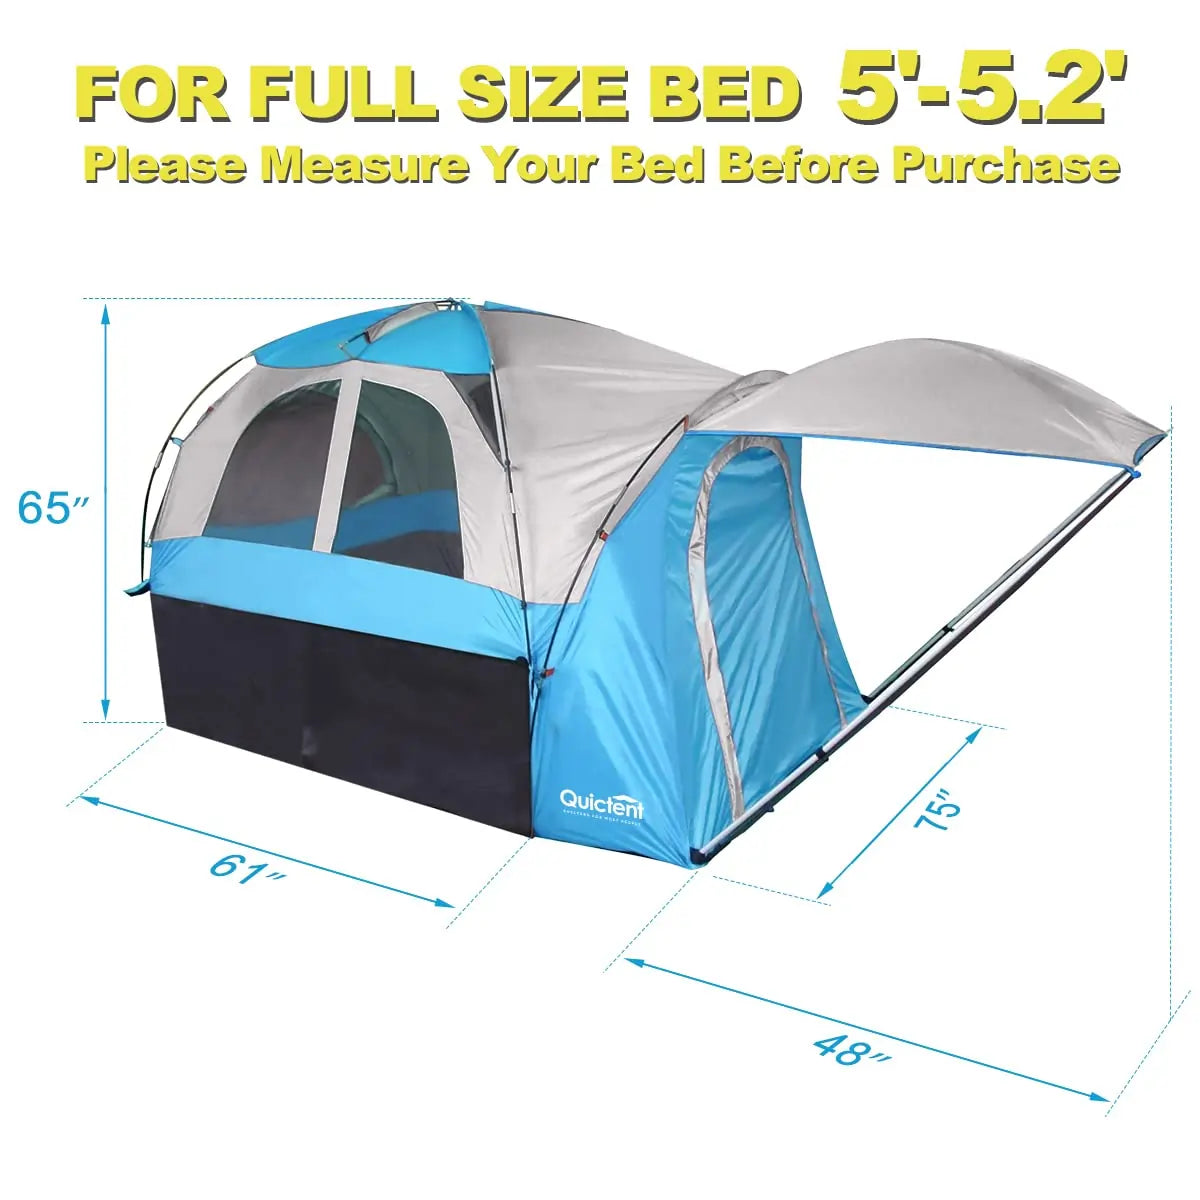 5'-5.2' Truck Bed Tent Size